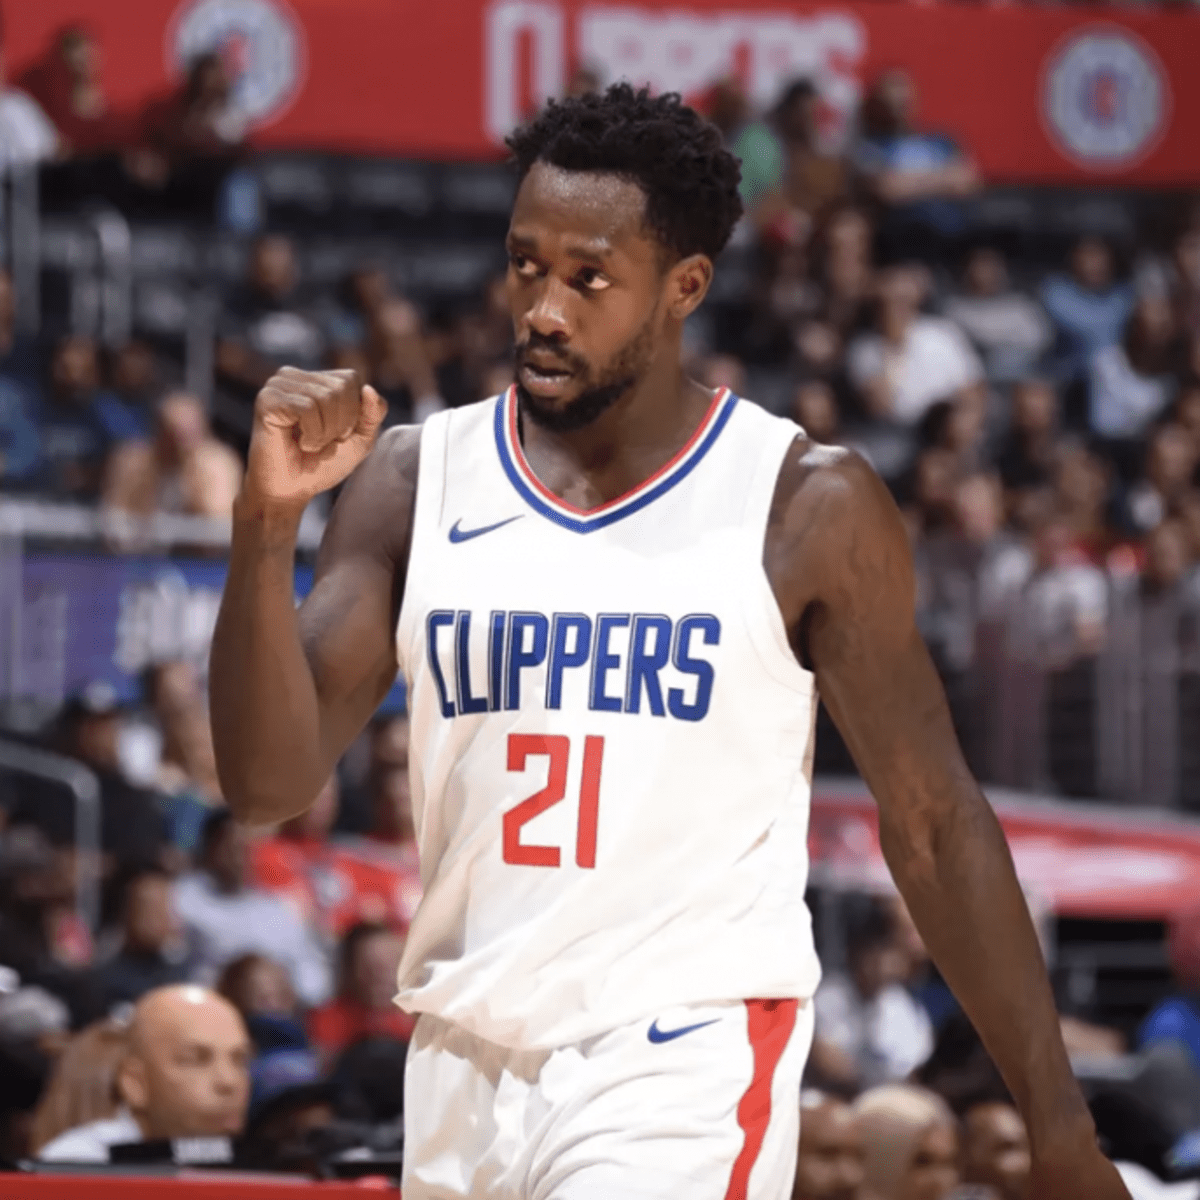 Patrick Beverley relishes the old and new in his return to Chicago